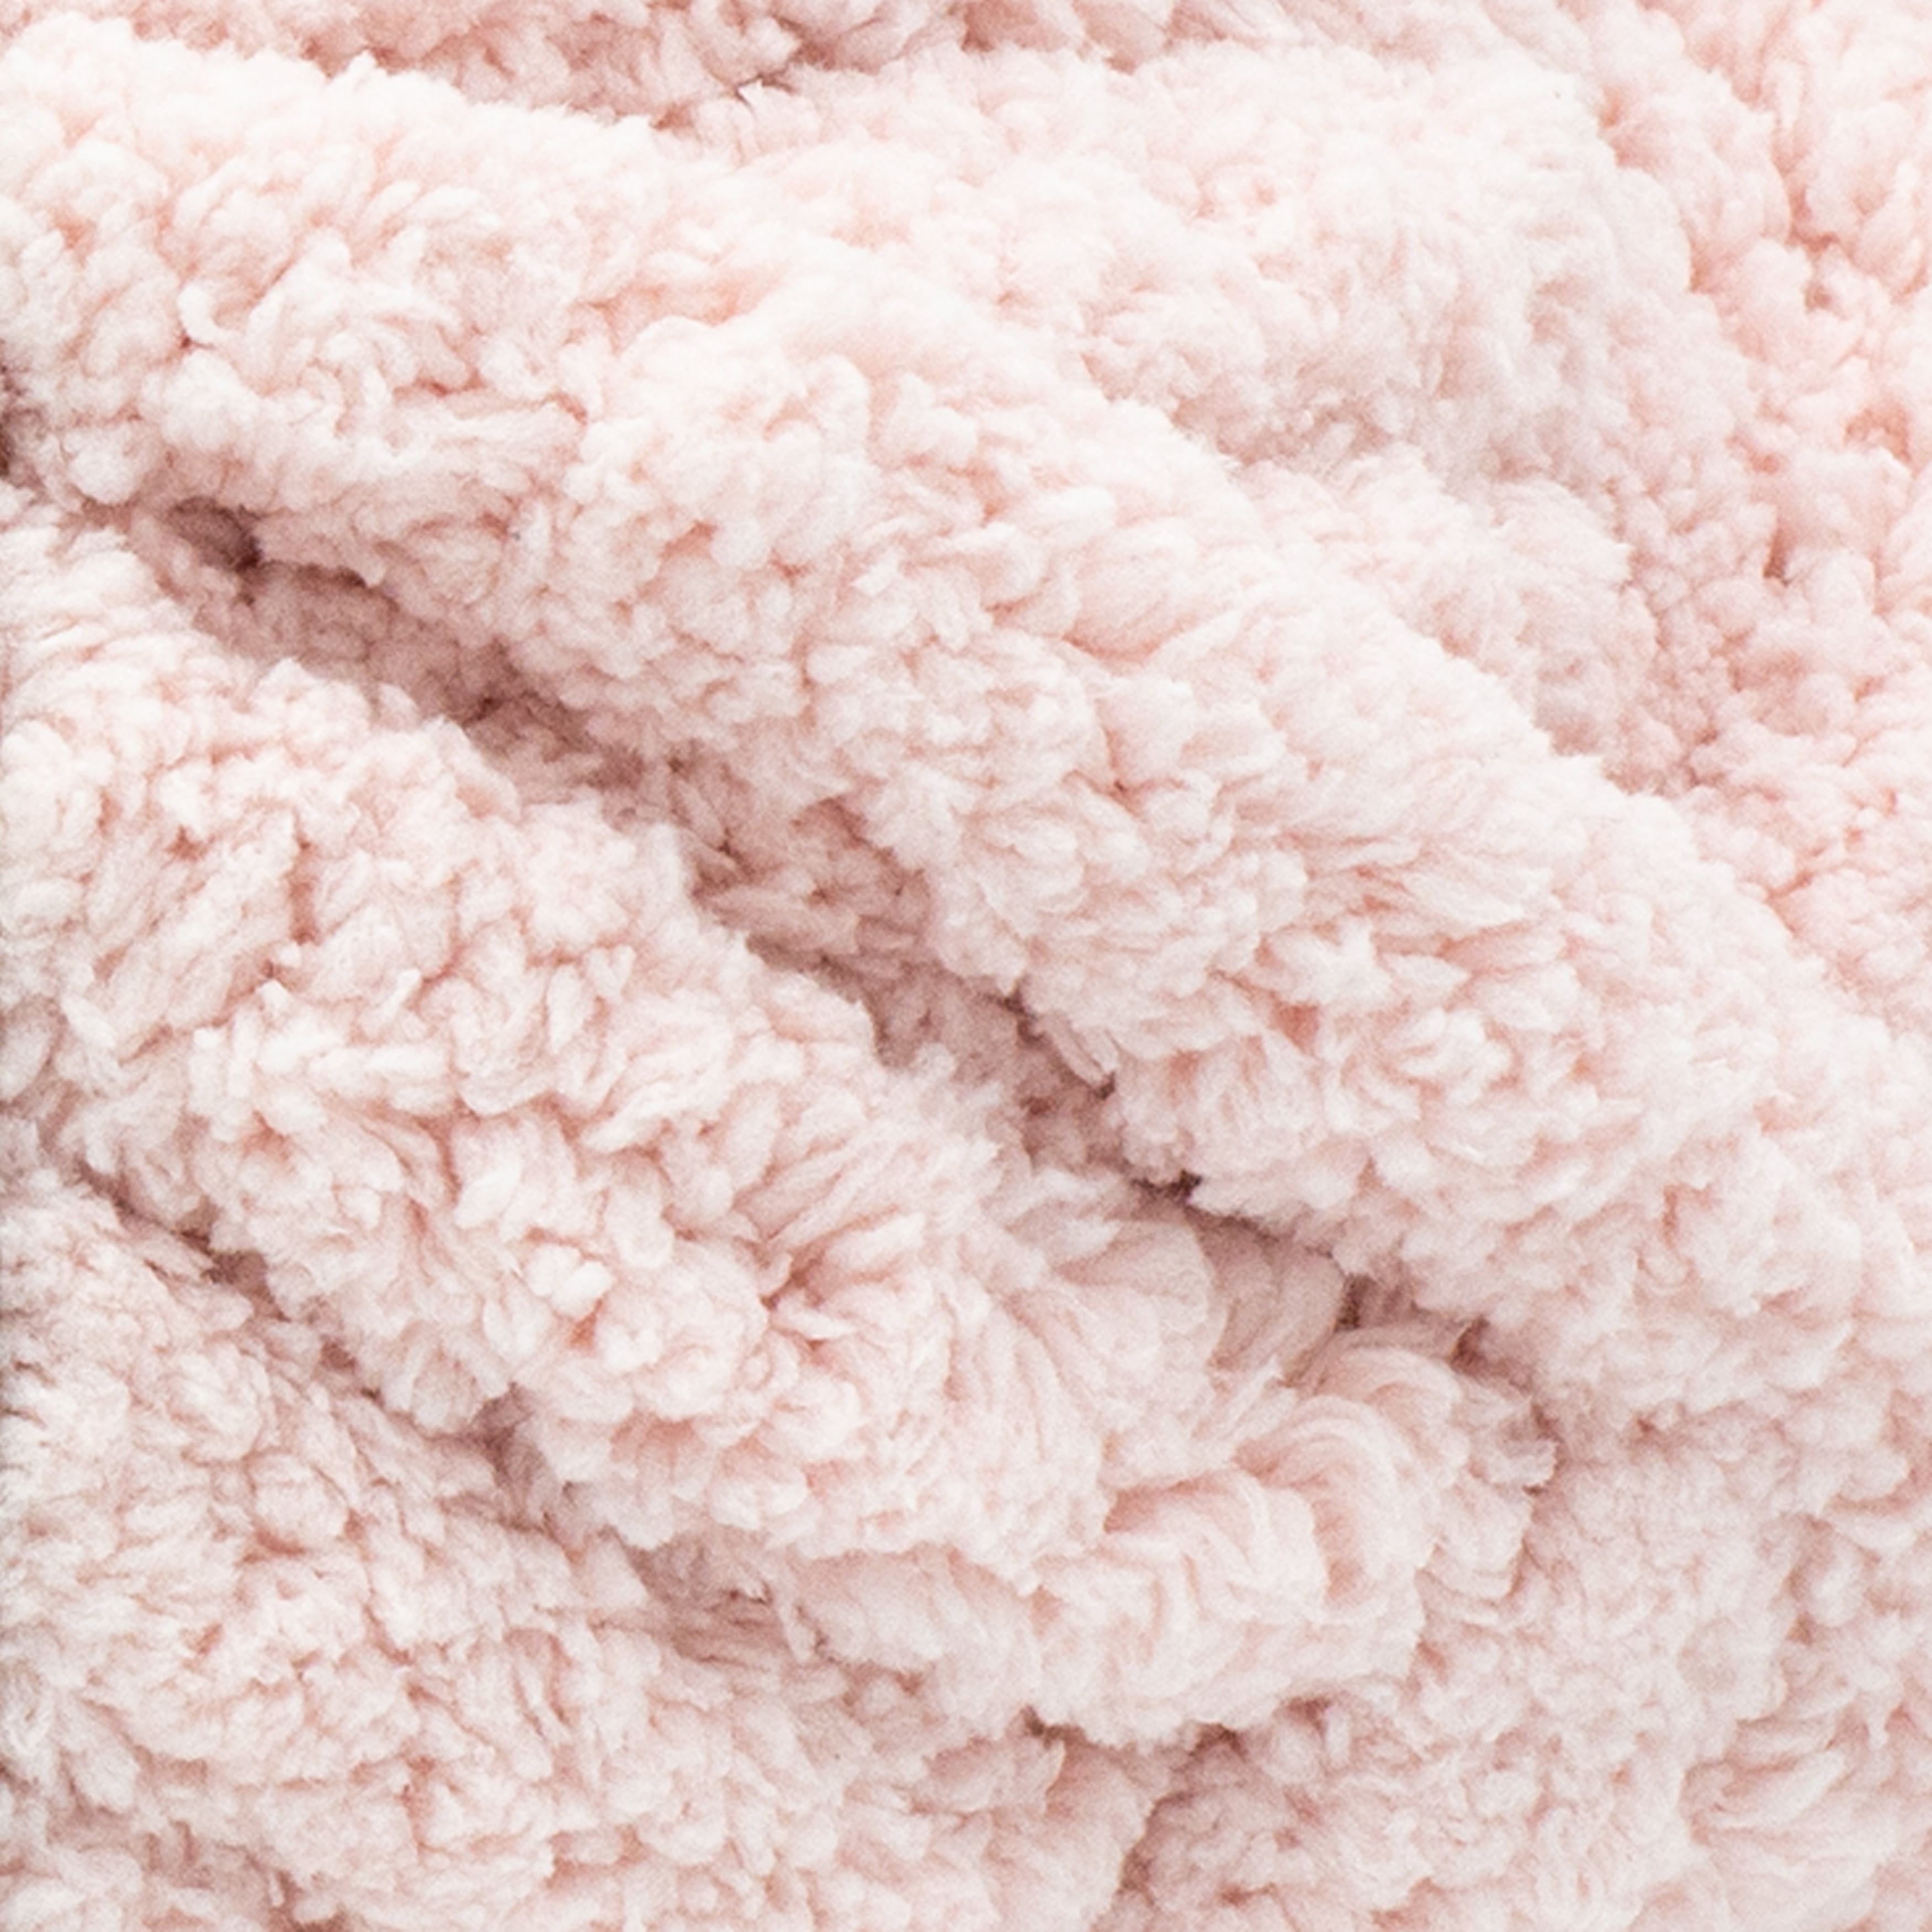 Chunky Knit Chenille Yarn 226g Super Soft Blanket Yarn Hand Knitting Spin  Yarn for Blanket Hat Scarf Pet Bed Carpet Yarn (Color : Pink)